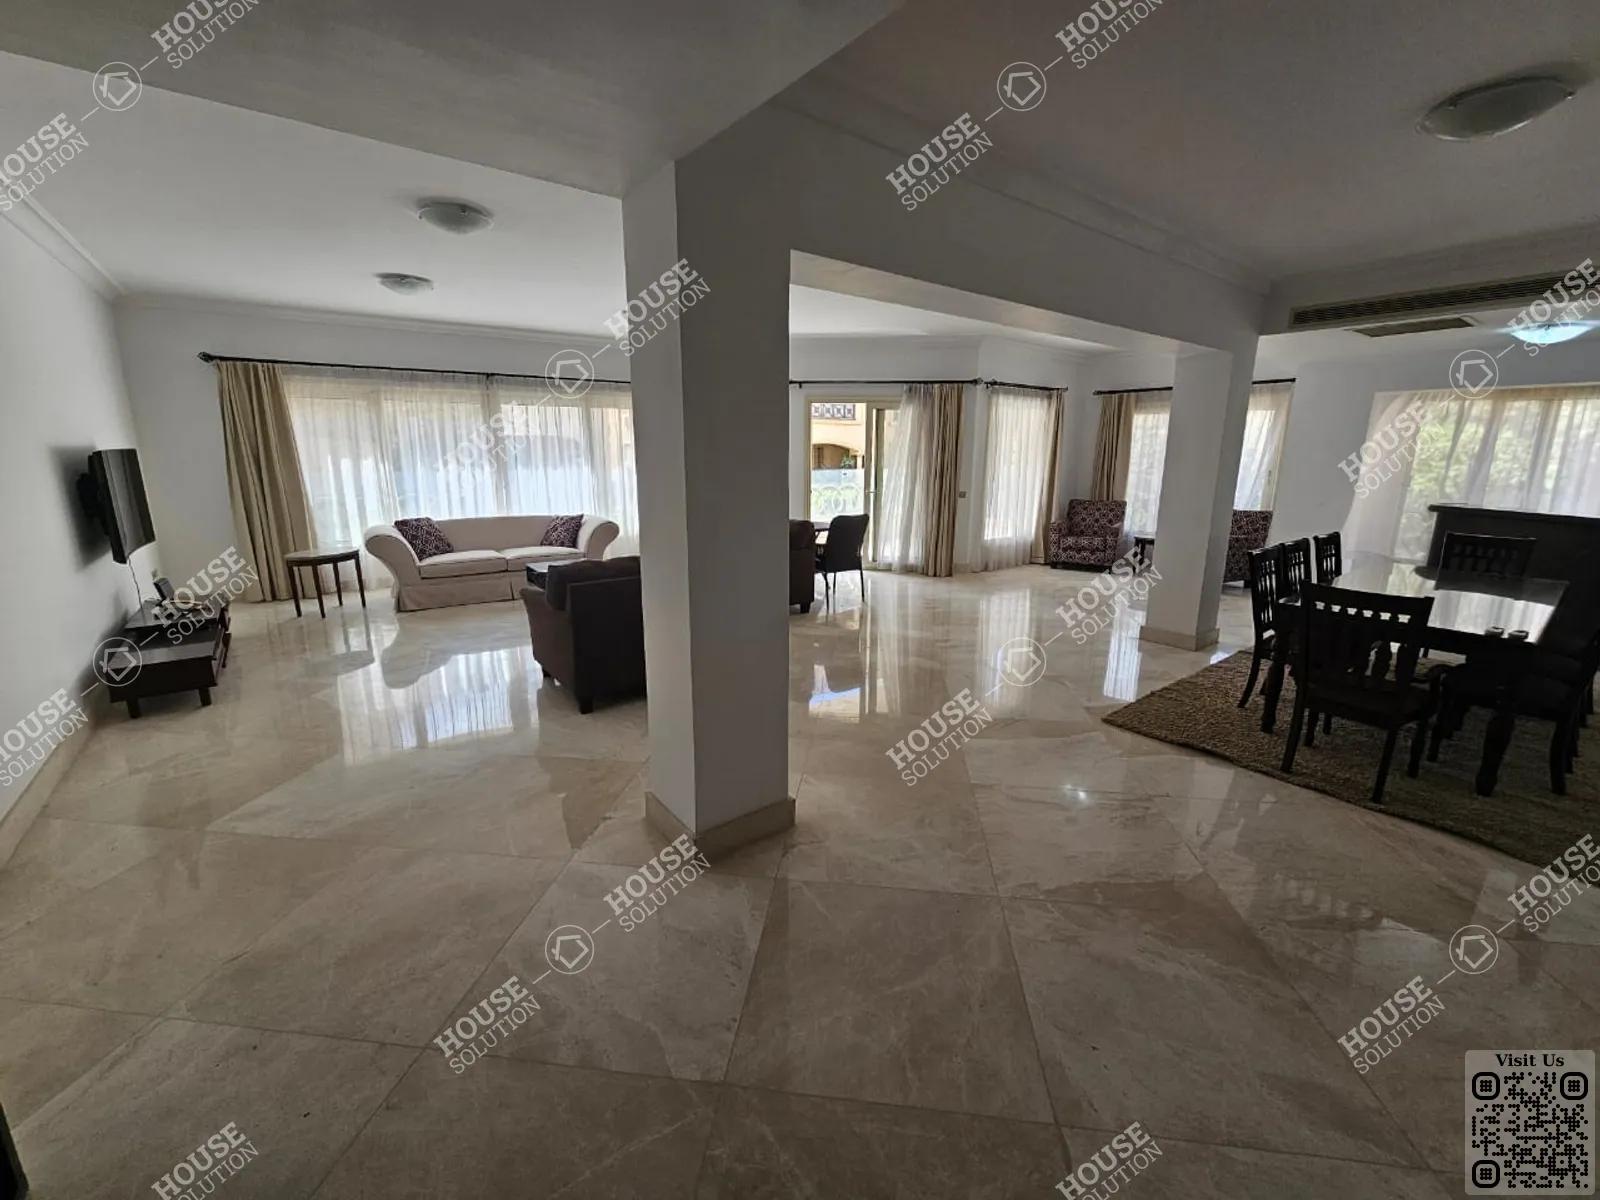 RECEPTION  @ Apartments For Rent In Maadi Maadi Sarayat Area: 320 m² consists of 4 Bedrooms 4 Bathrooms Modern furnished 5 stars #5806-0